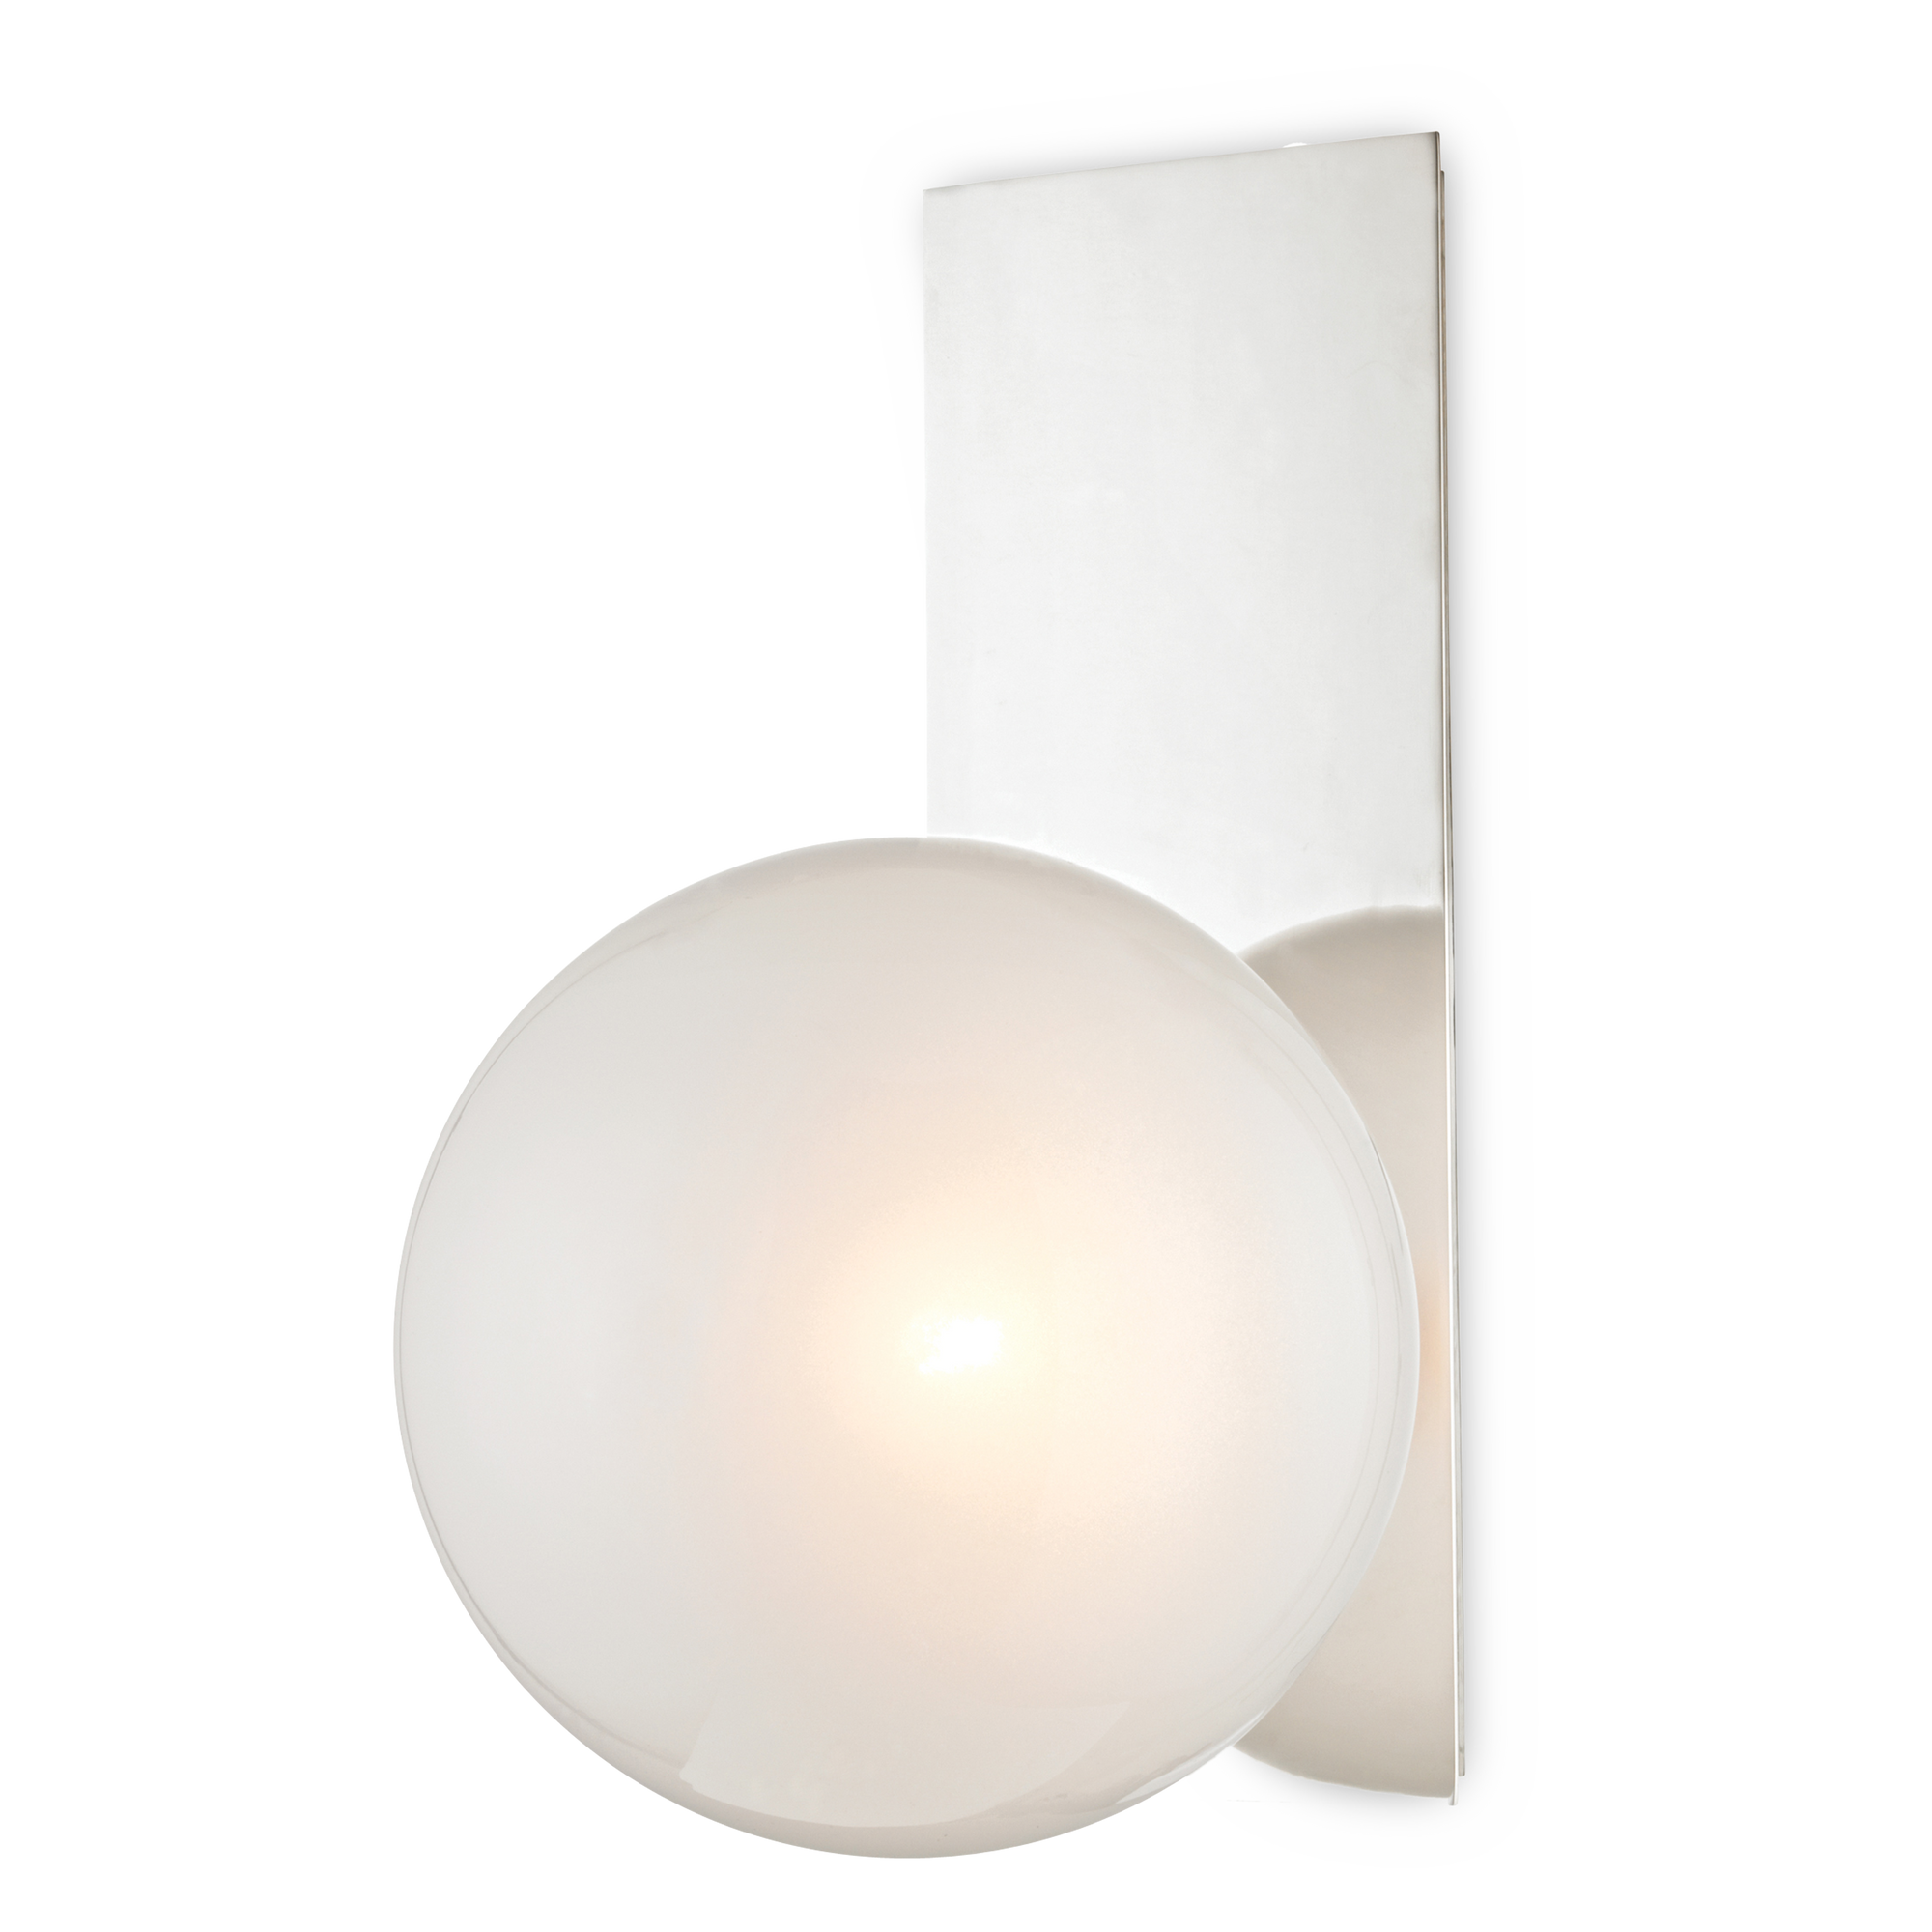 Playful and minimal, this light features a single orb floating on a rectangular polished nickel beam, as if some unseen magnetism were at work.